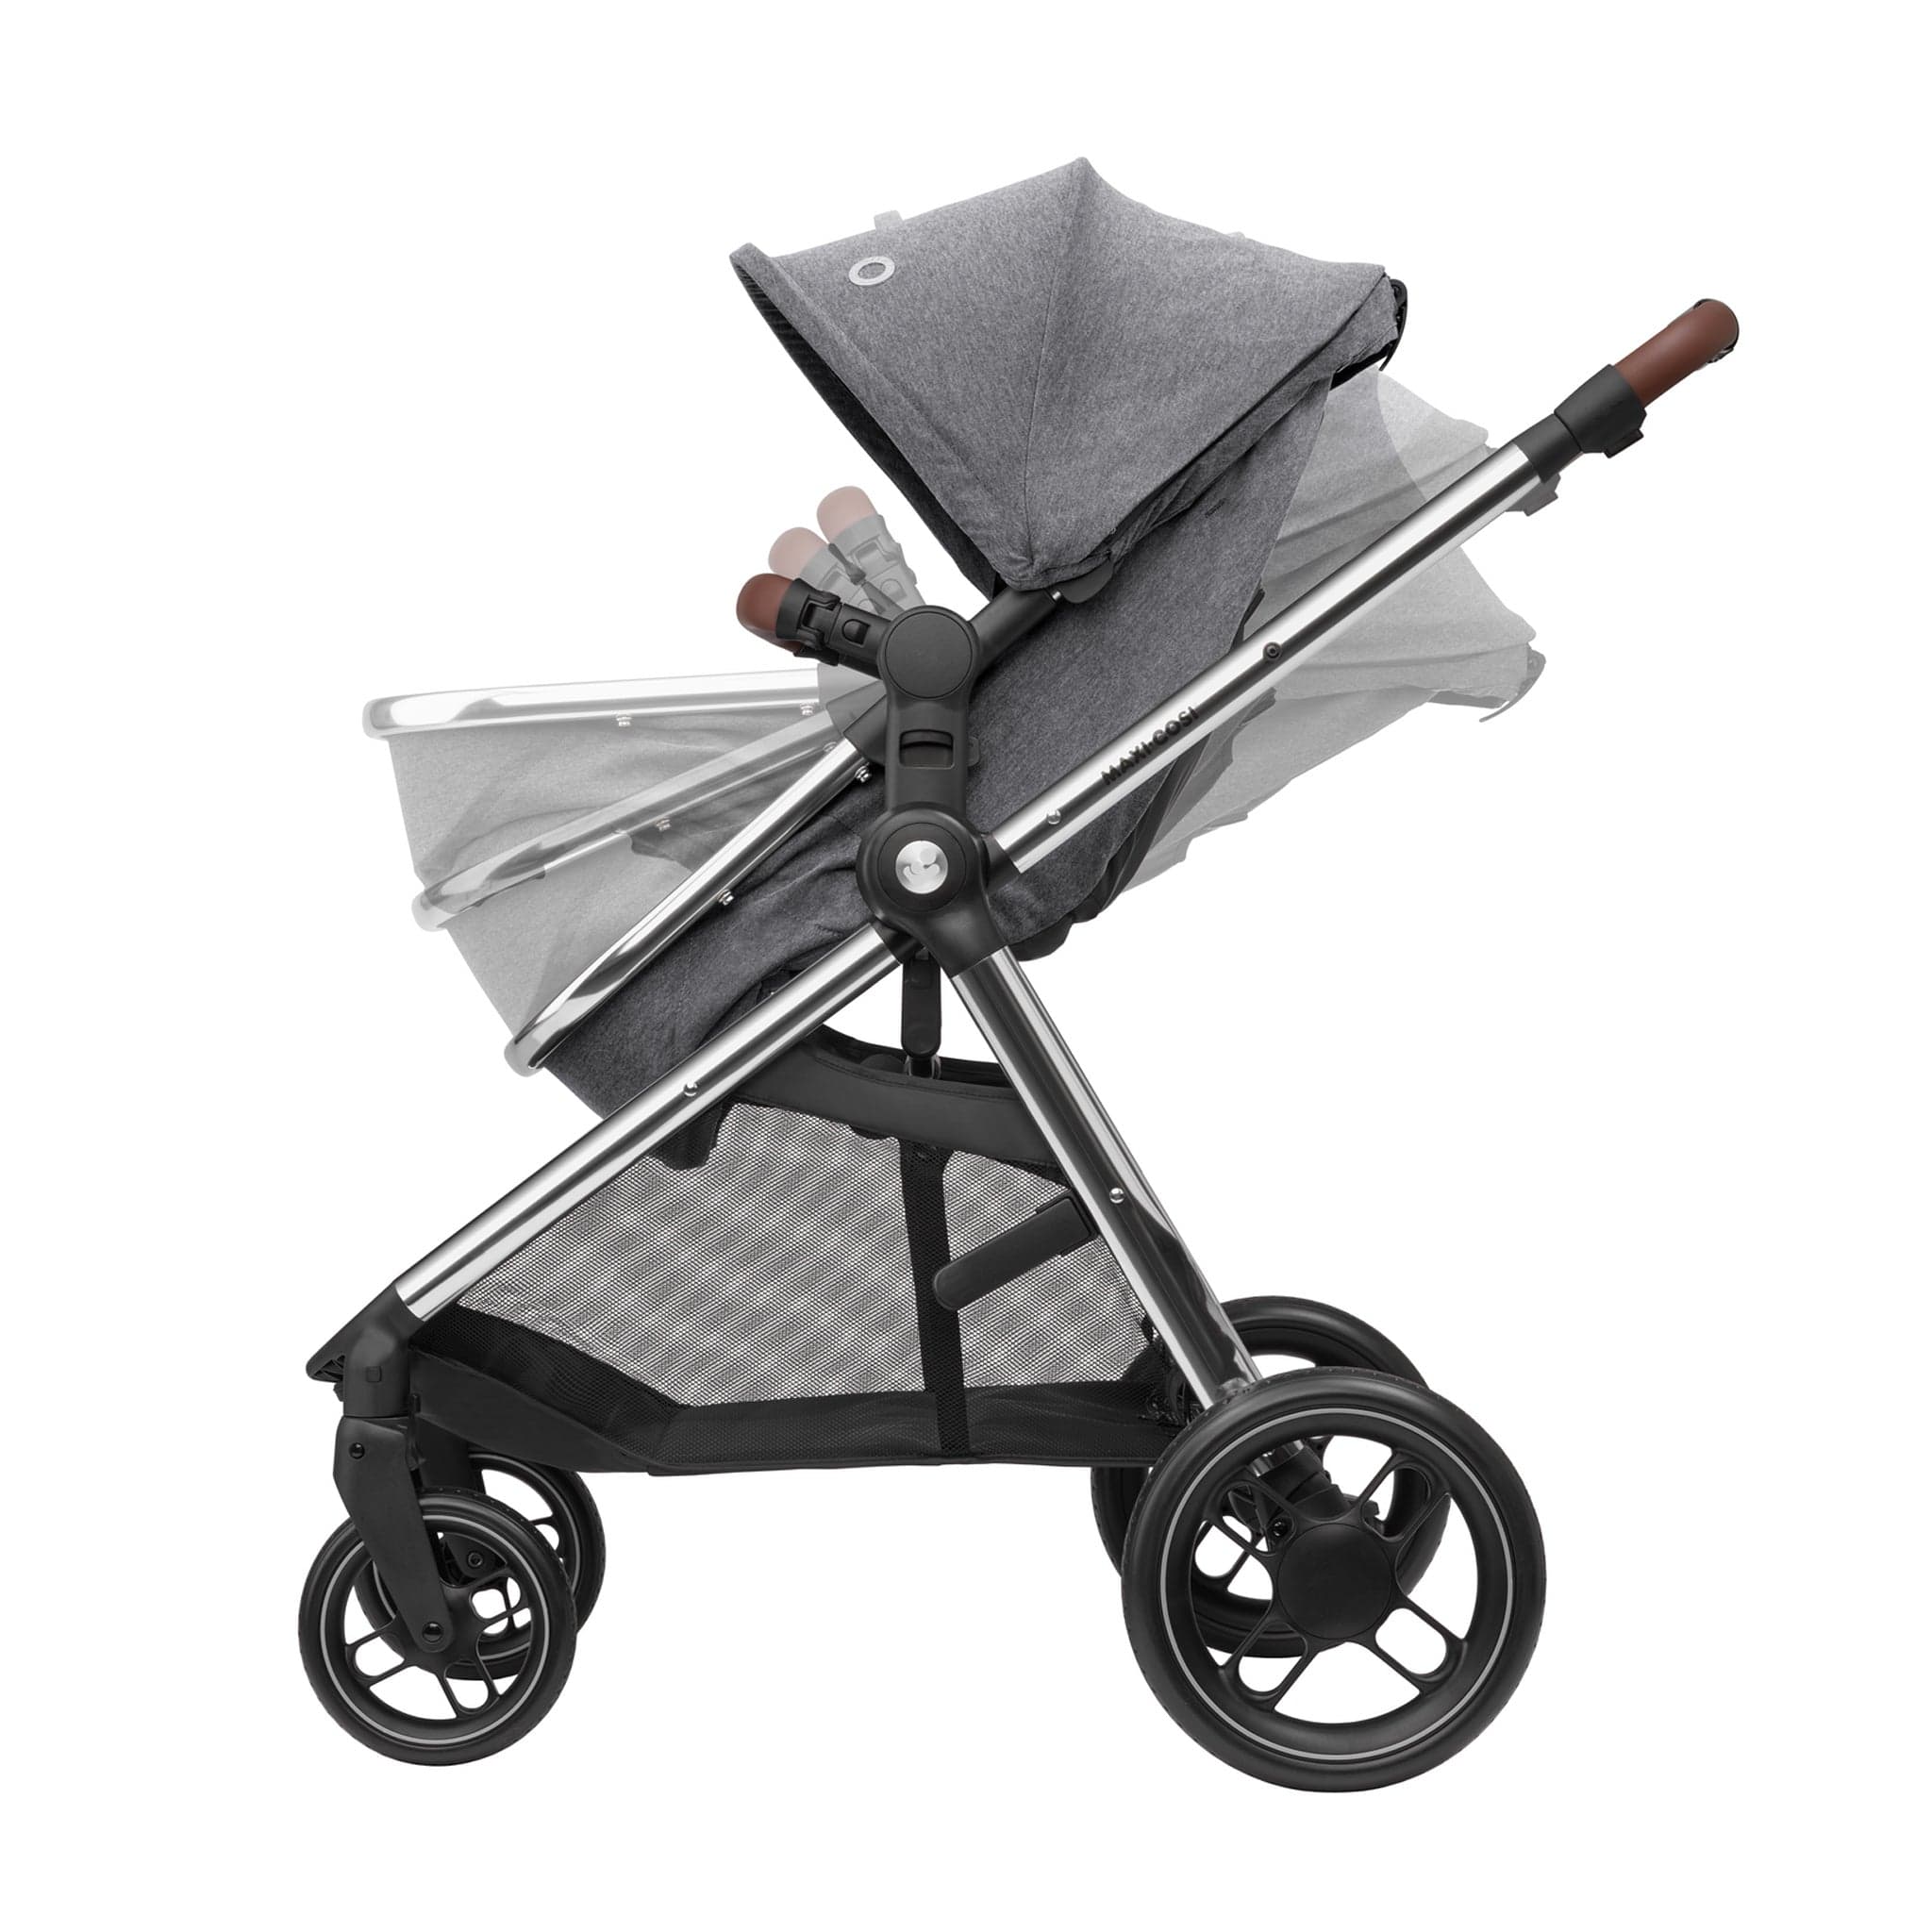 Maxi-Cosi travel systems Maxi-Cosi Zelia Luxe with Cabriofix i-Size Travel System in Twillic Grey